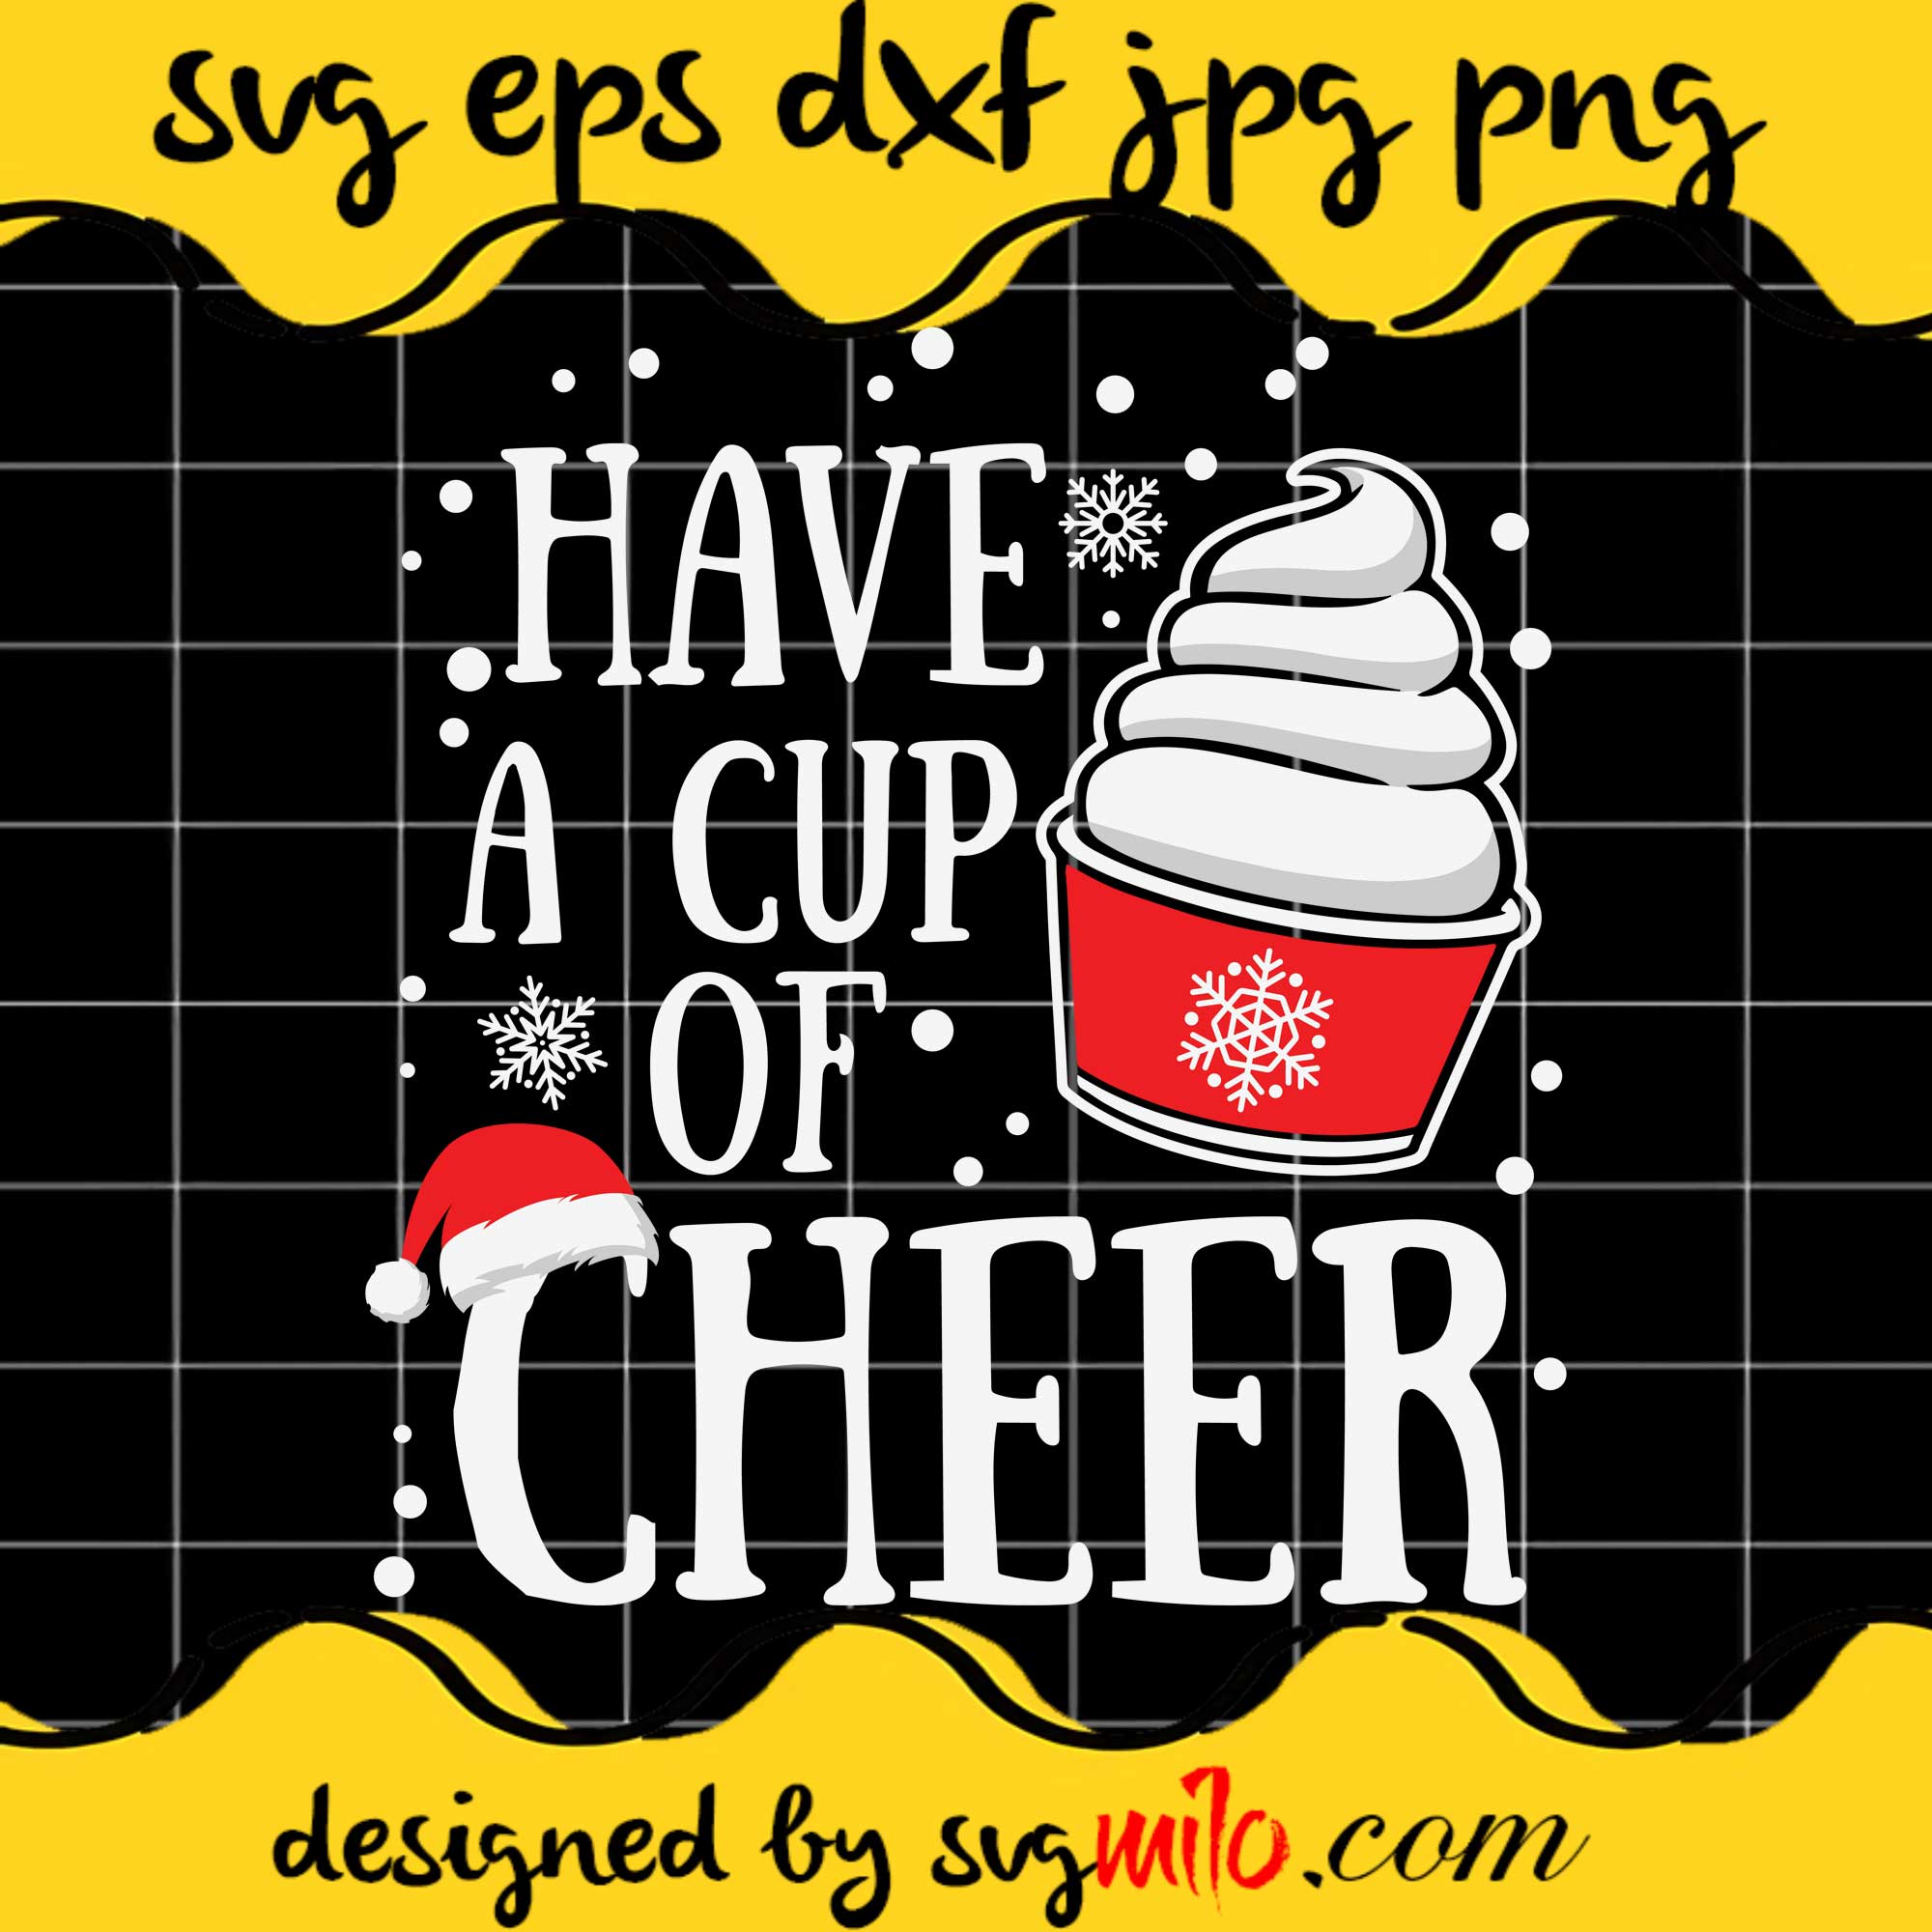 Have A Cup Of Cheer SVG Cricut cut file, Silhouette cutting file,Premium Quality SVG - SVGMILO